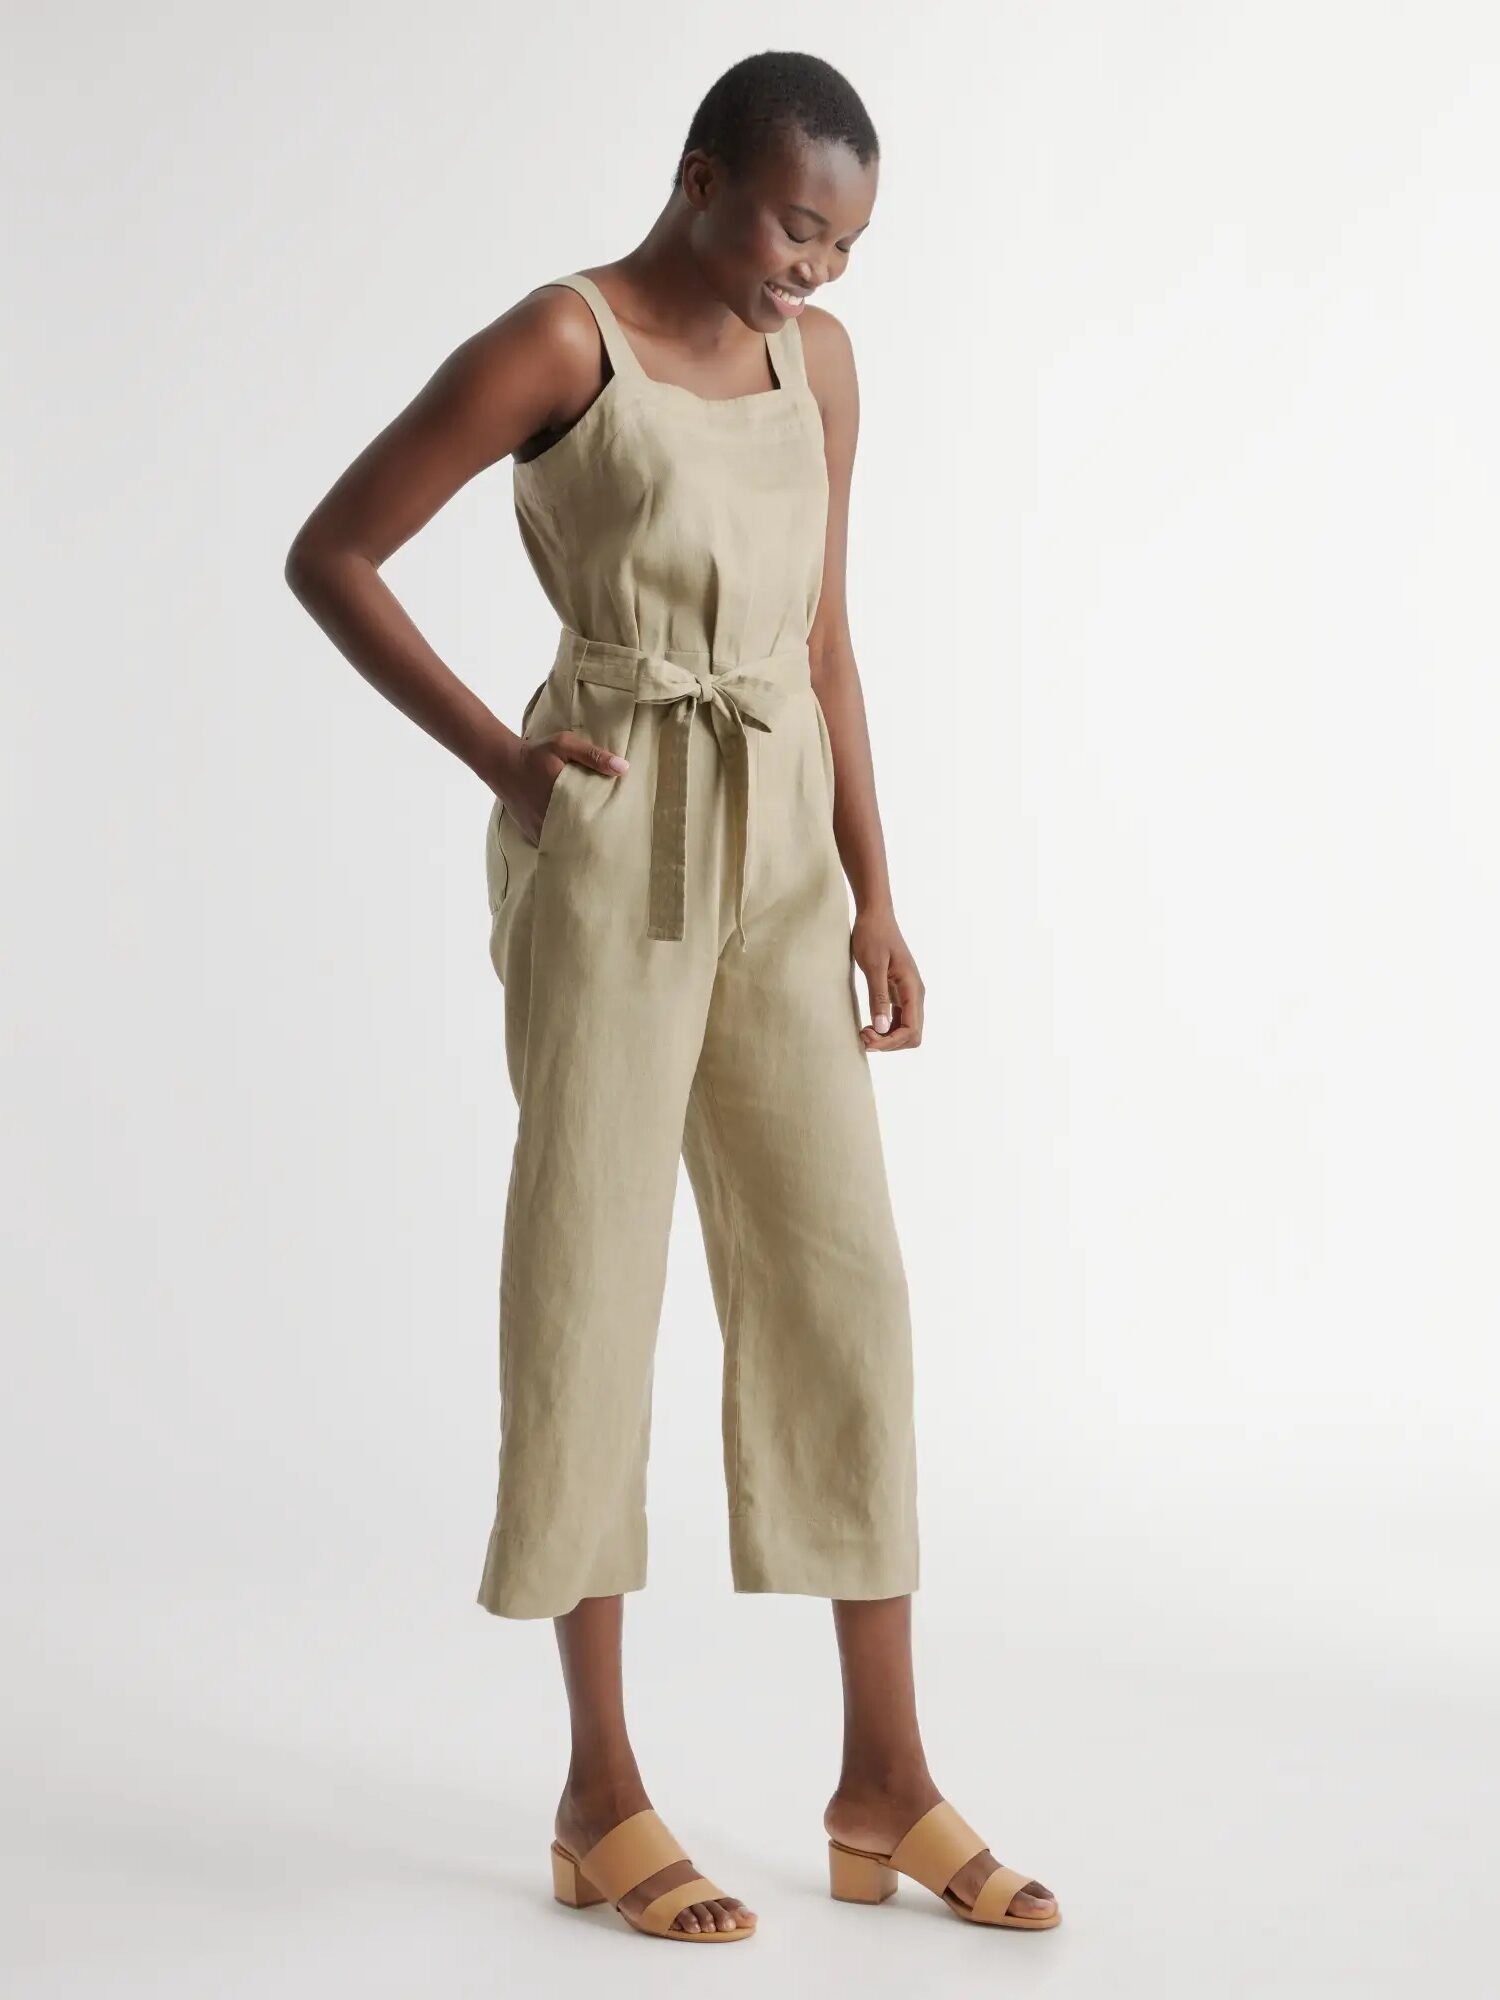 Linen fashion to shop now: Shirts, dresses, pants, and more - Reviewed